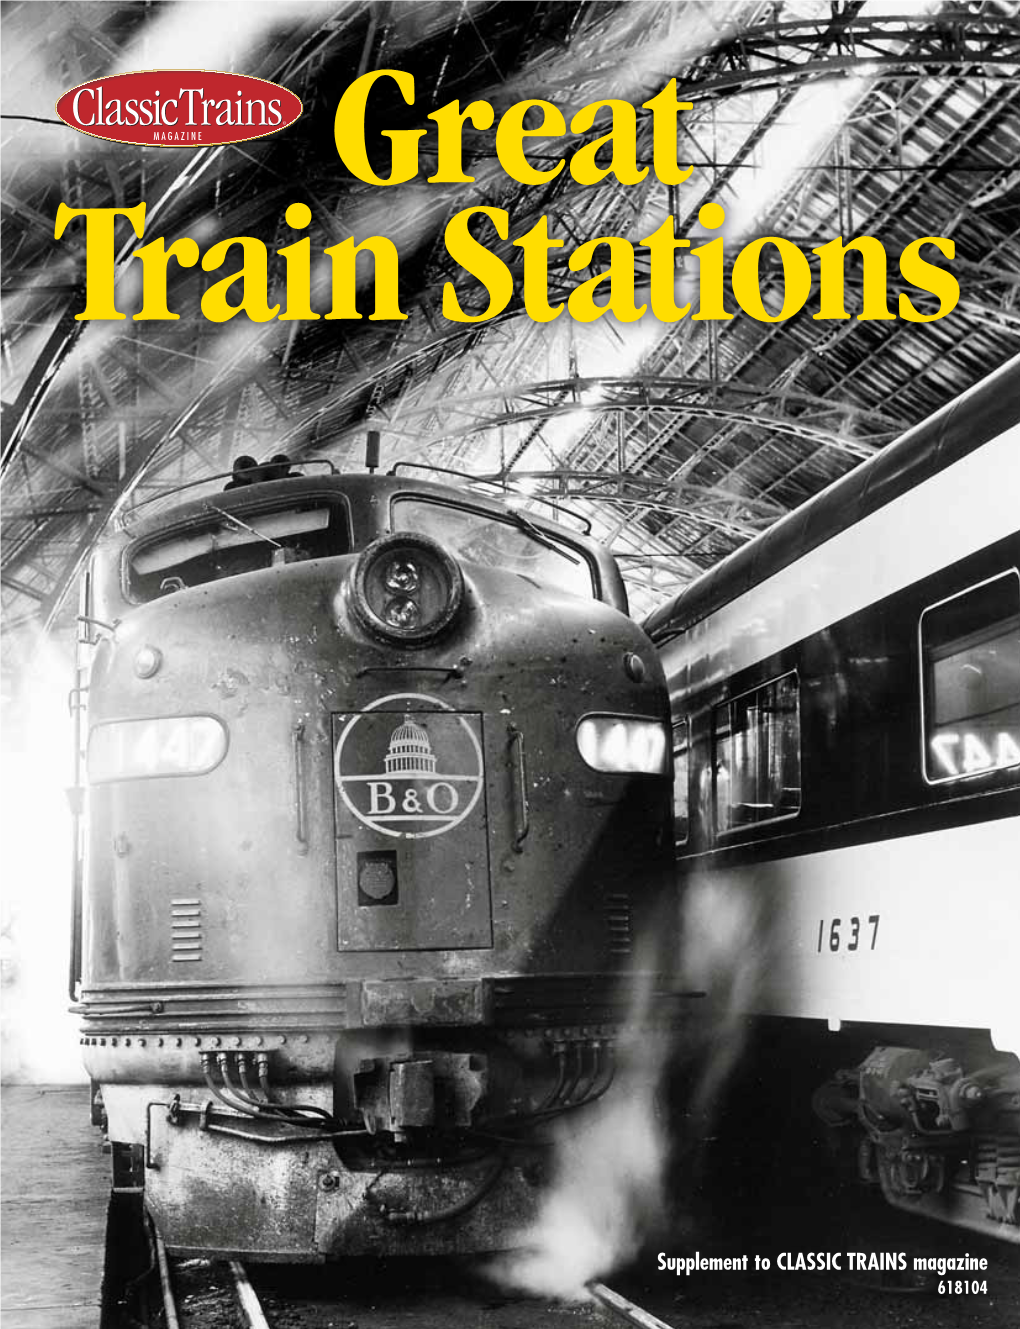 Supplement to CLASSIC TRAINS Magazine 618104 Great Train Stations